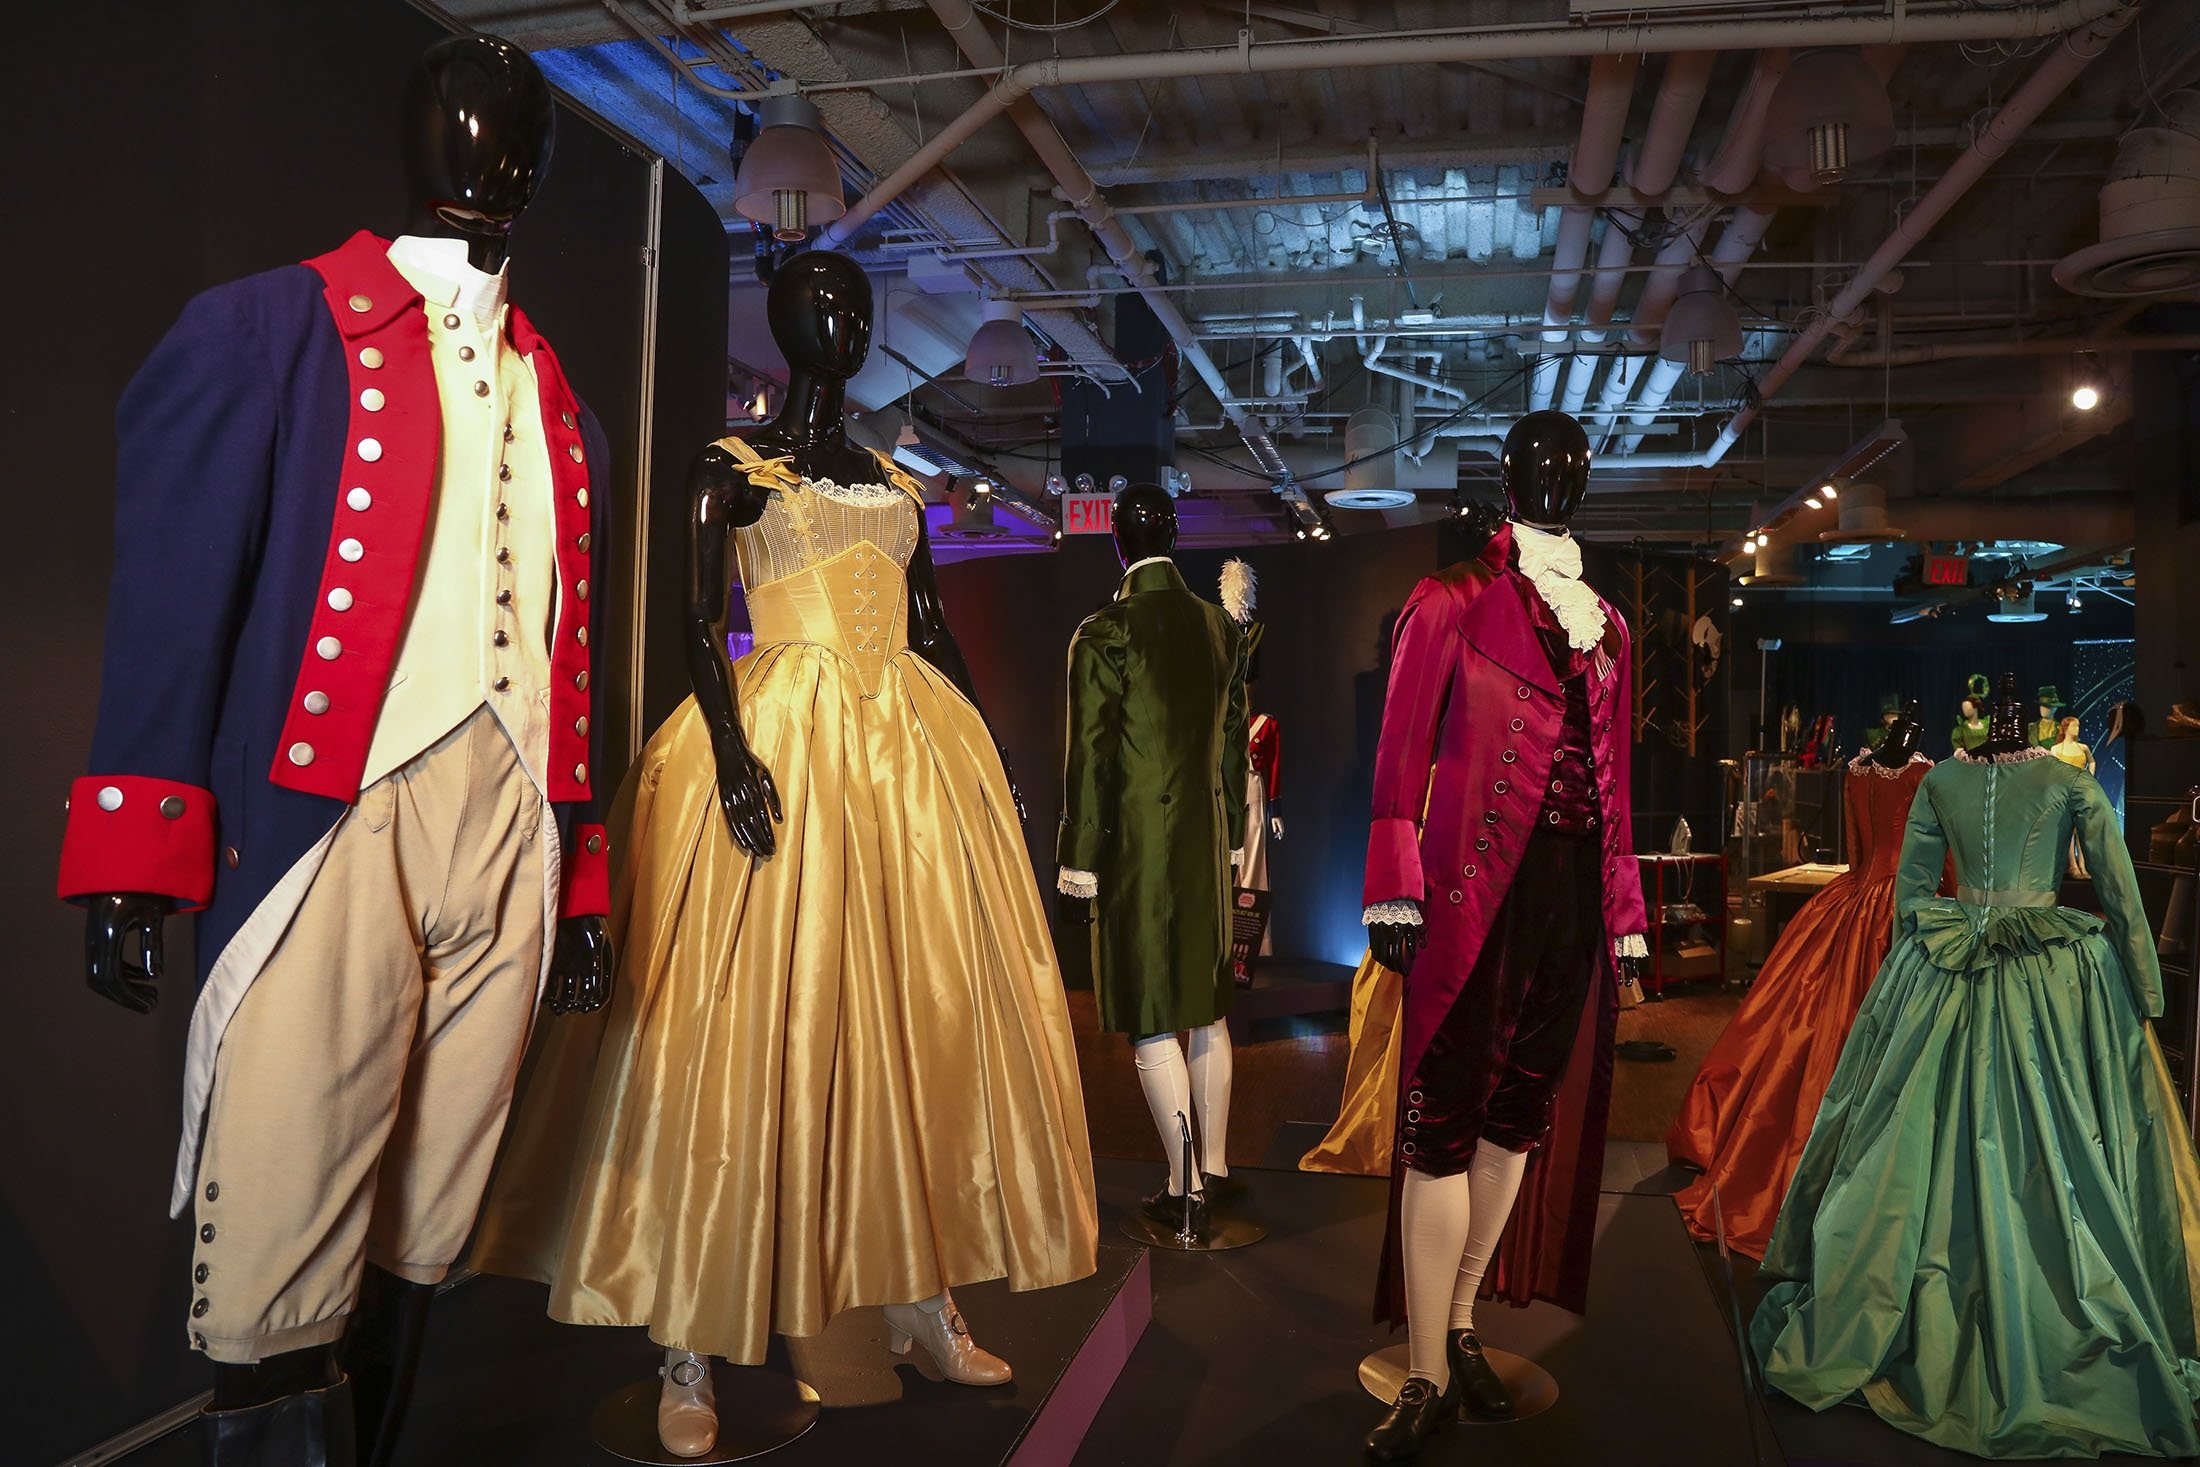 Costumes from the Broadway musical "Hamilton" are displayed at the "Showstoppers! Spectacular Costumes from Stage & Screen" exhibit in Times Square, New York, U.S., Aug. 2, 2021. (AP Photo)